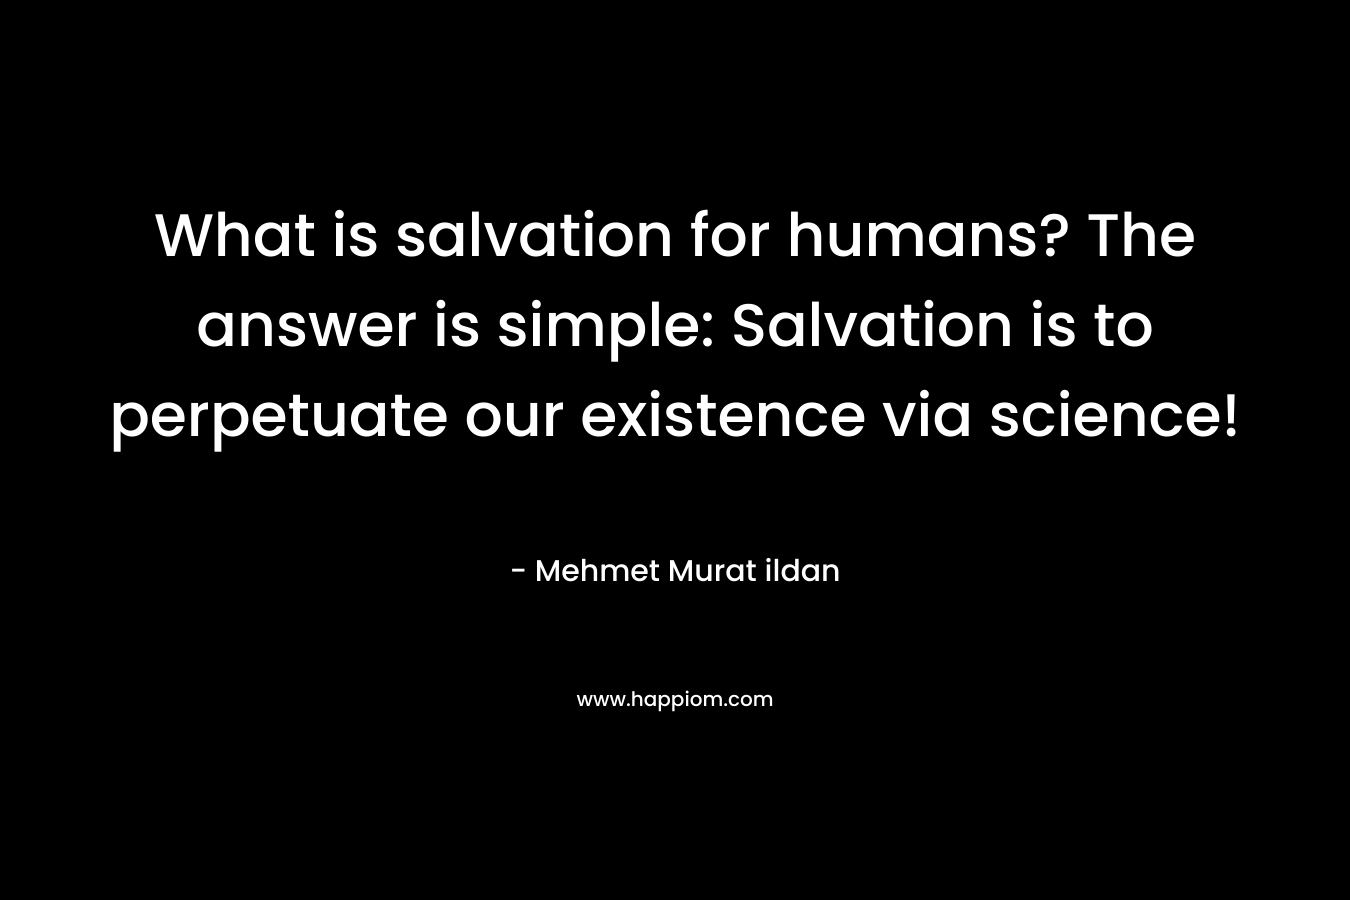 What is salvation for humans? The answer is simple: Salvation is to perpetuate our existence via science!